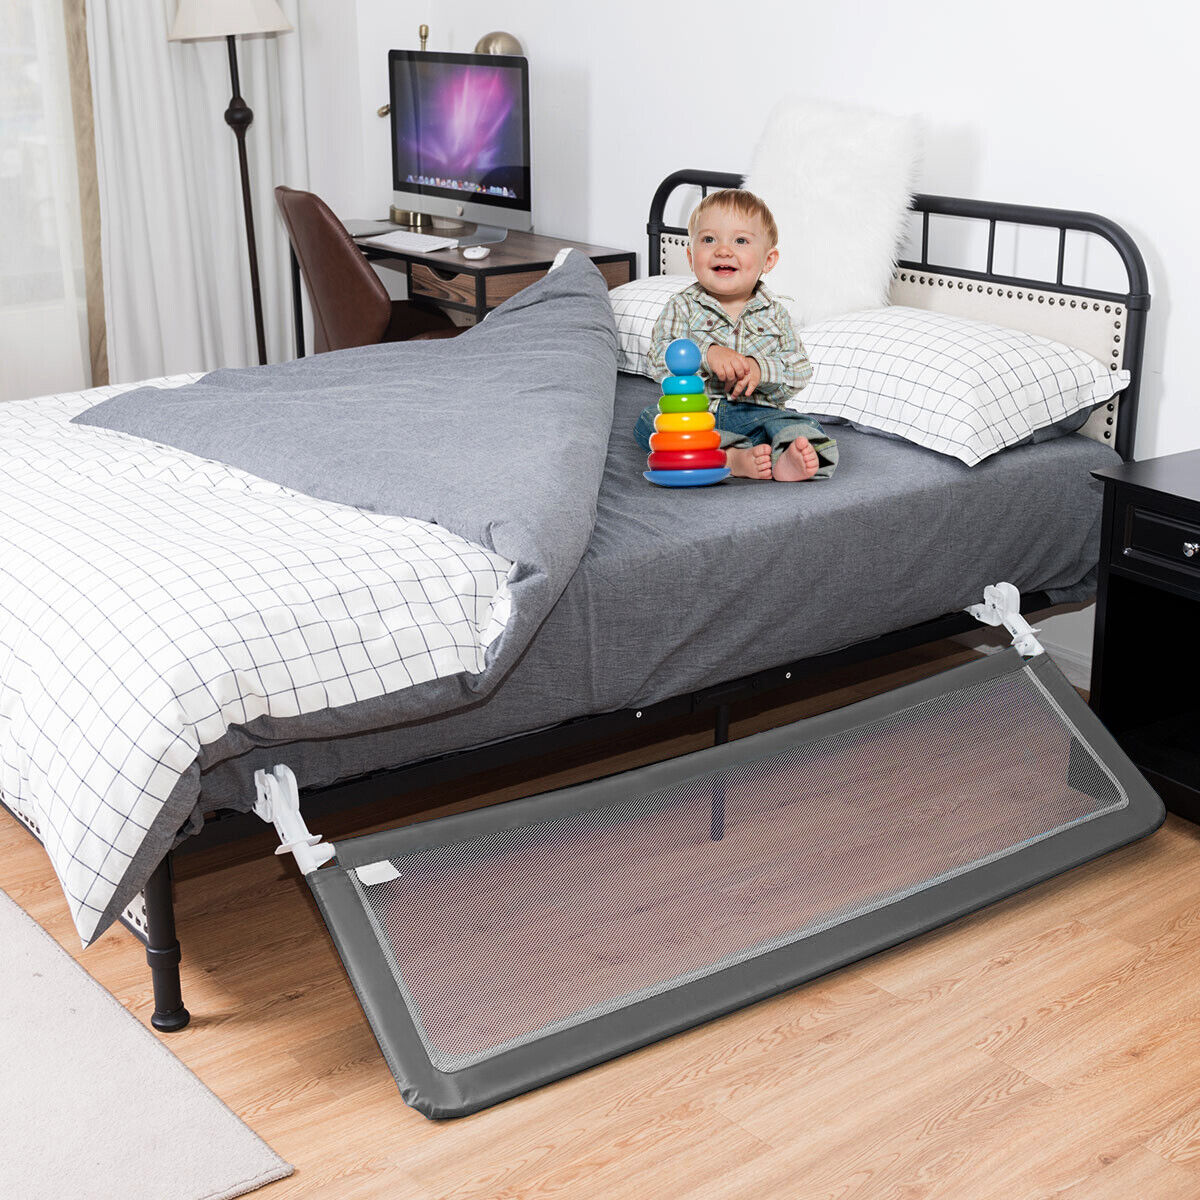 1.5M Safety Rail Guard for Baby/Toddler/Infants Adjustable Bed Rail Protector Kids